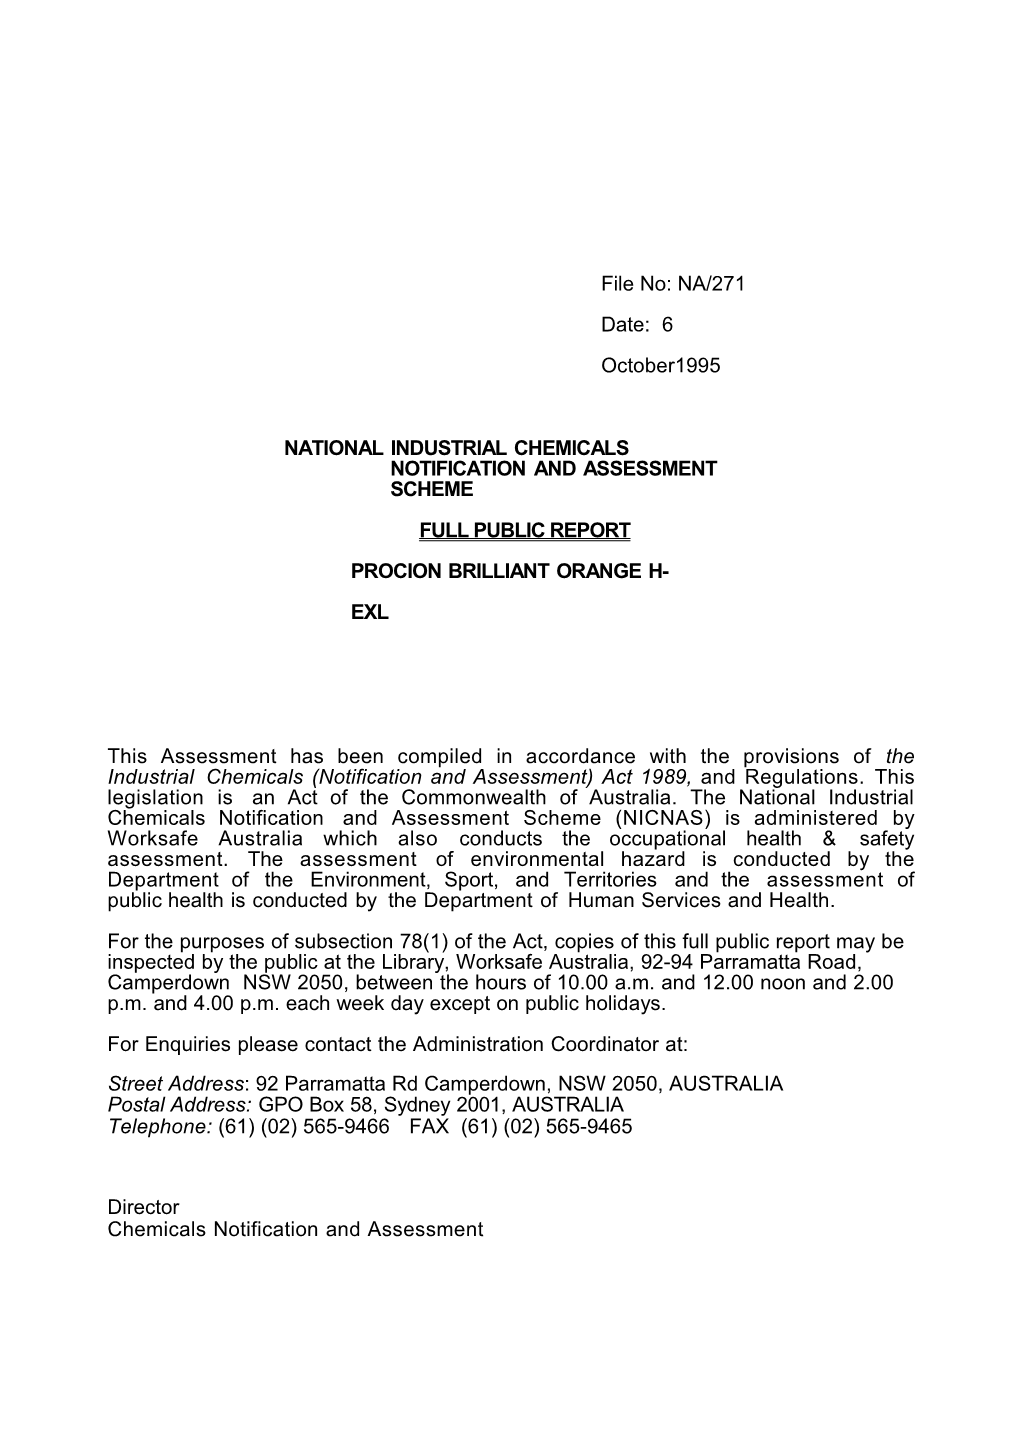 National Industrial Chemicals Notification and Assessment Scheme s17